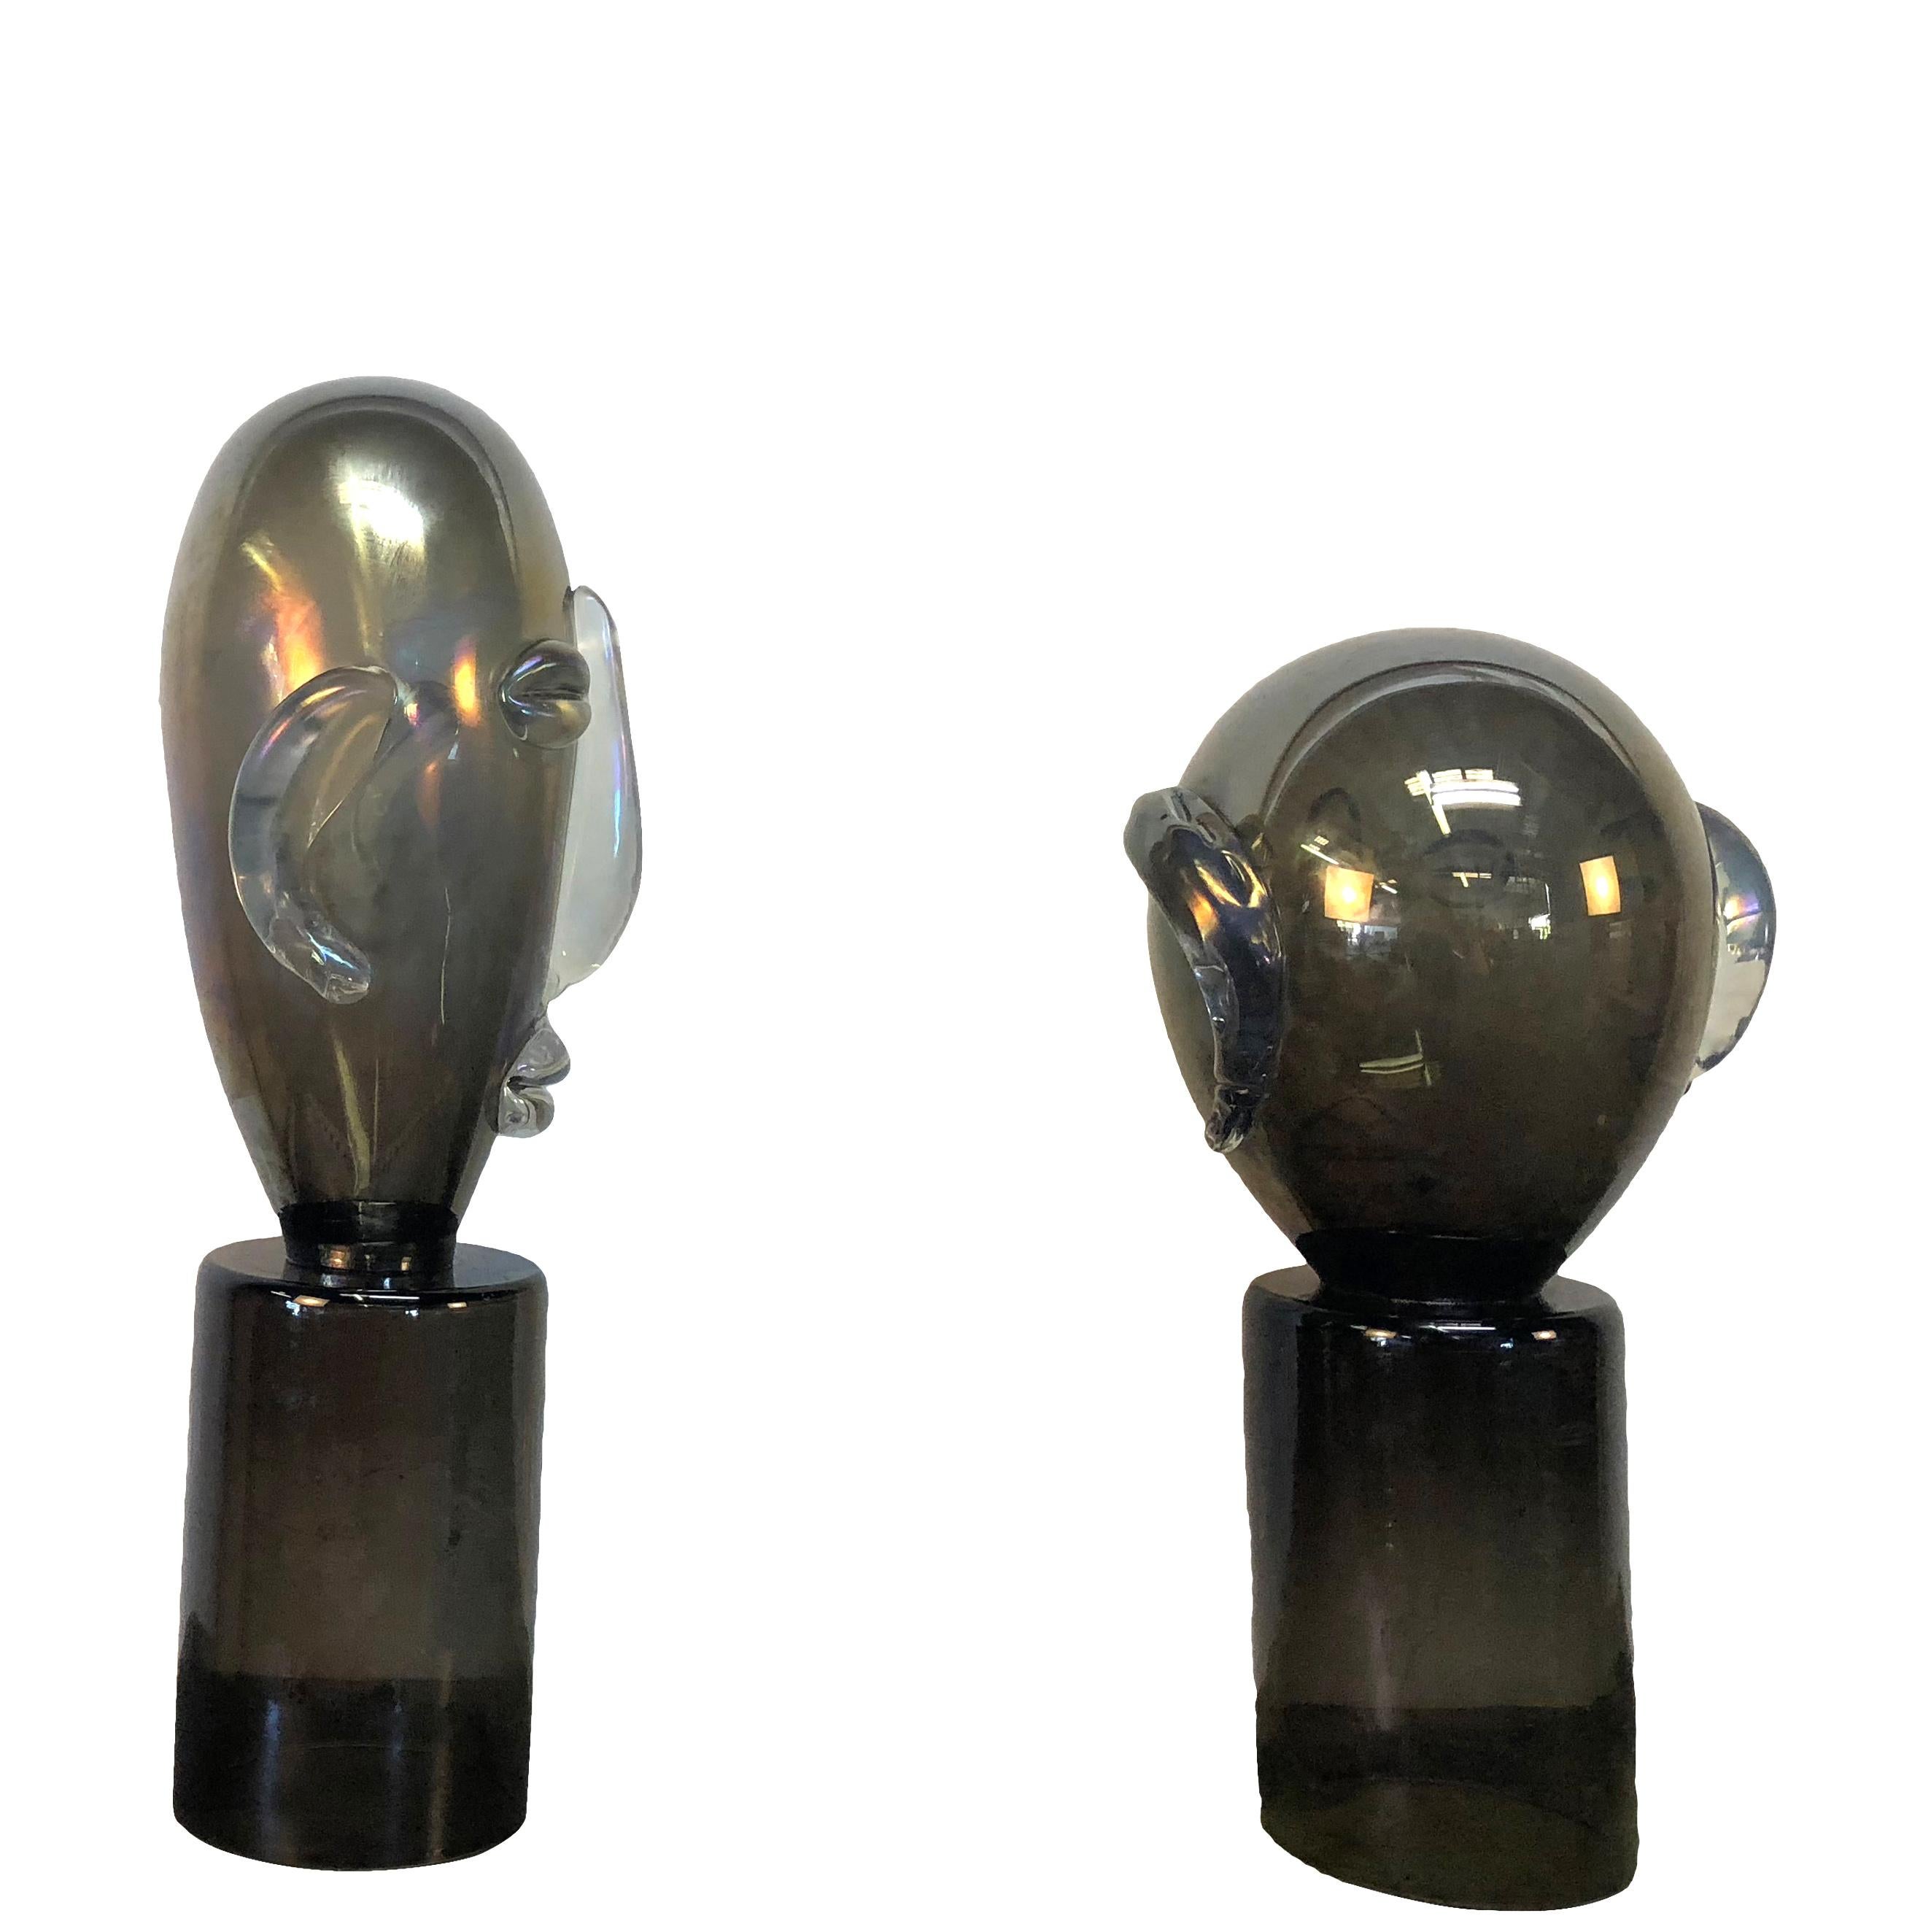 A dark-grey, black vintage Mid-Century Modern Italian pair of Murano glass head ornament set on a round base in the manner of Pablo Picasso. In good condition created in hand blown glass with iridescent highlights. Wear consistent with age and use.